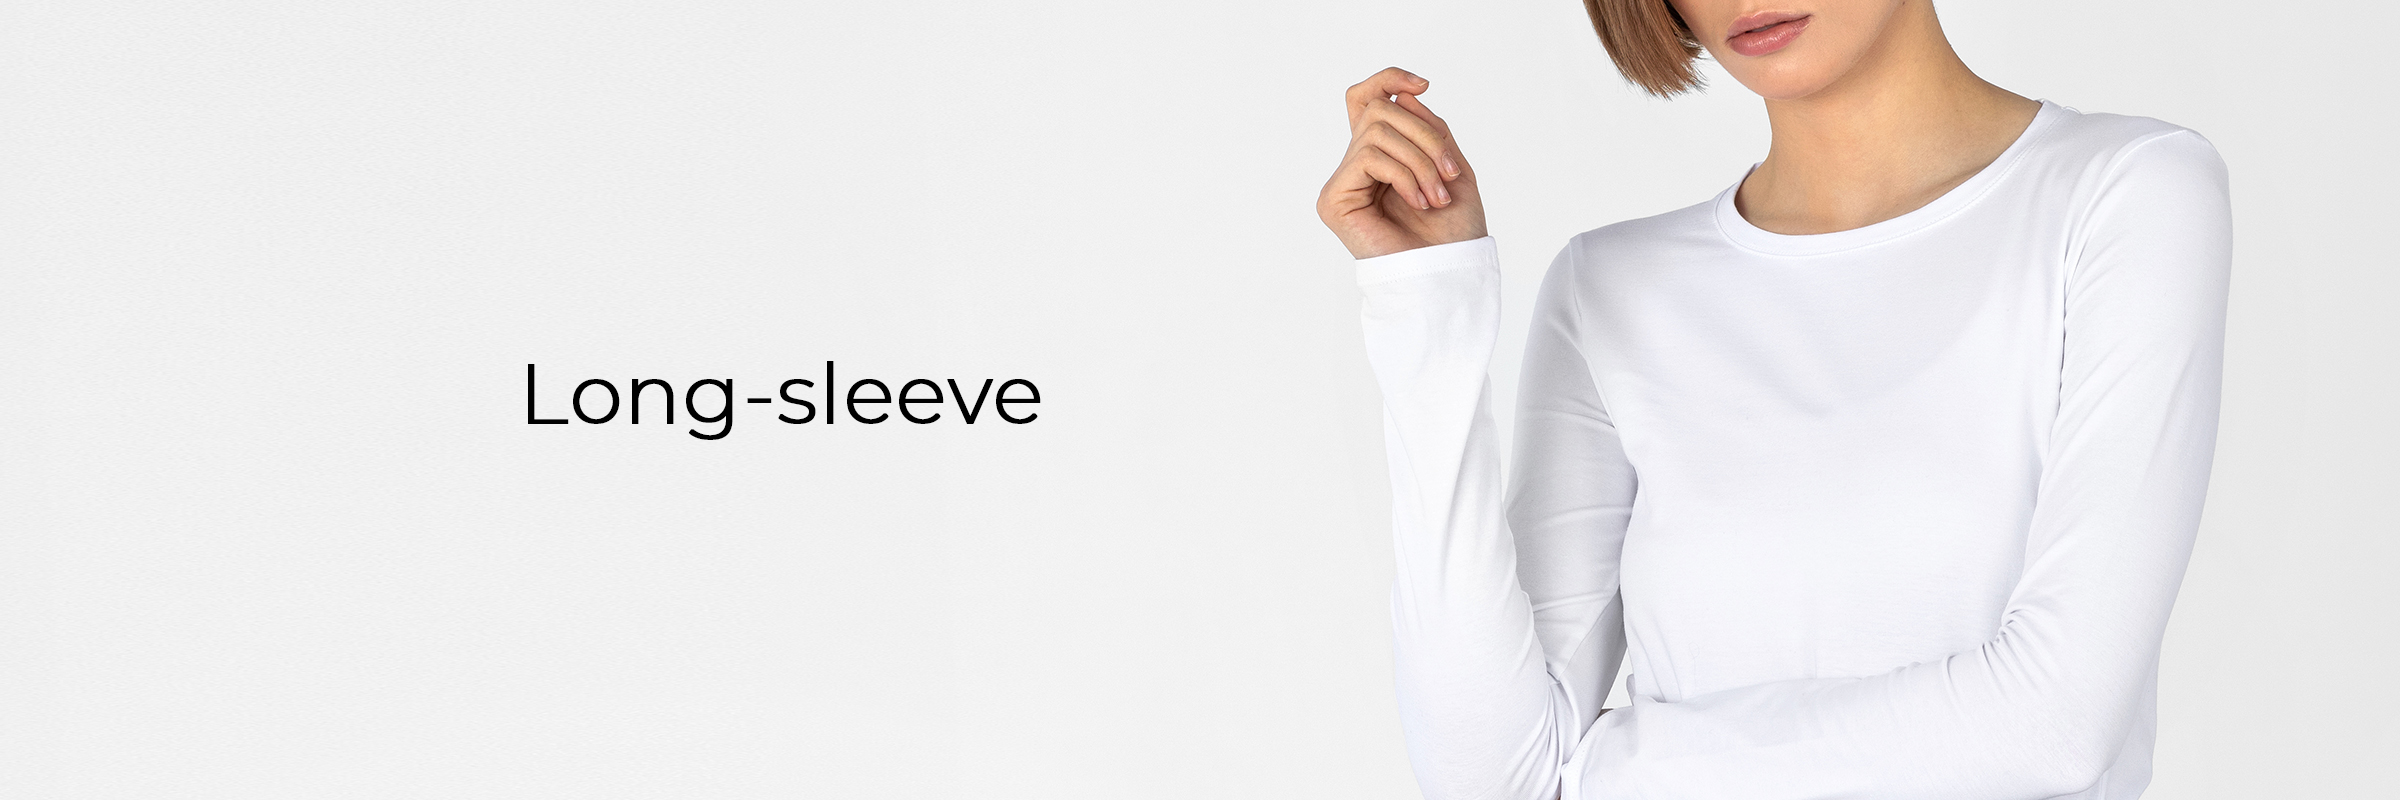 long-sleeve women's collection banner